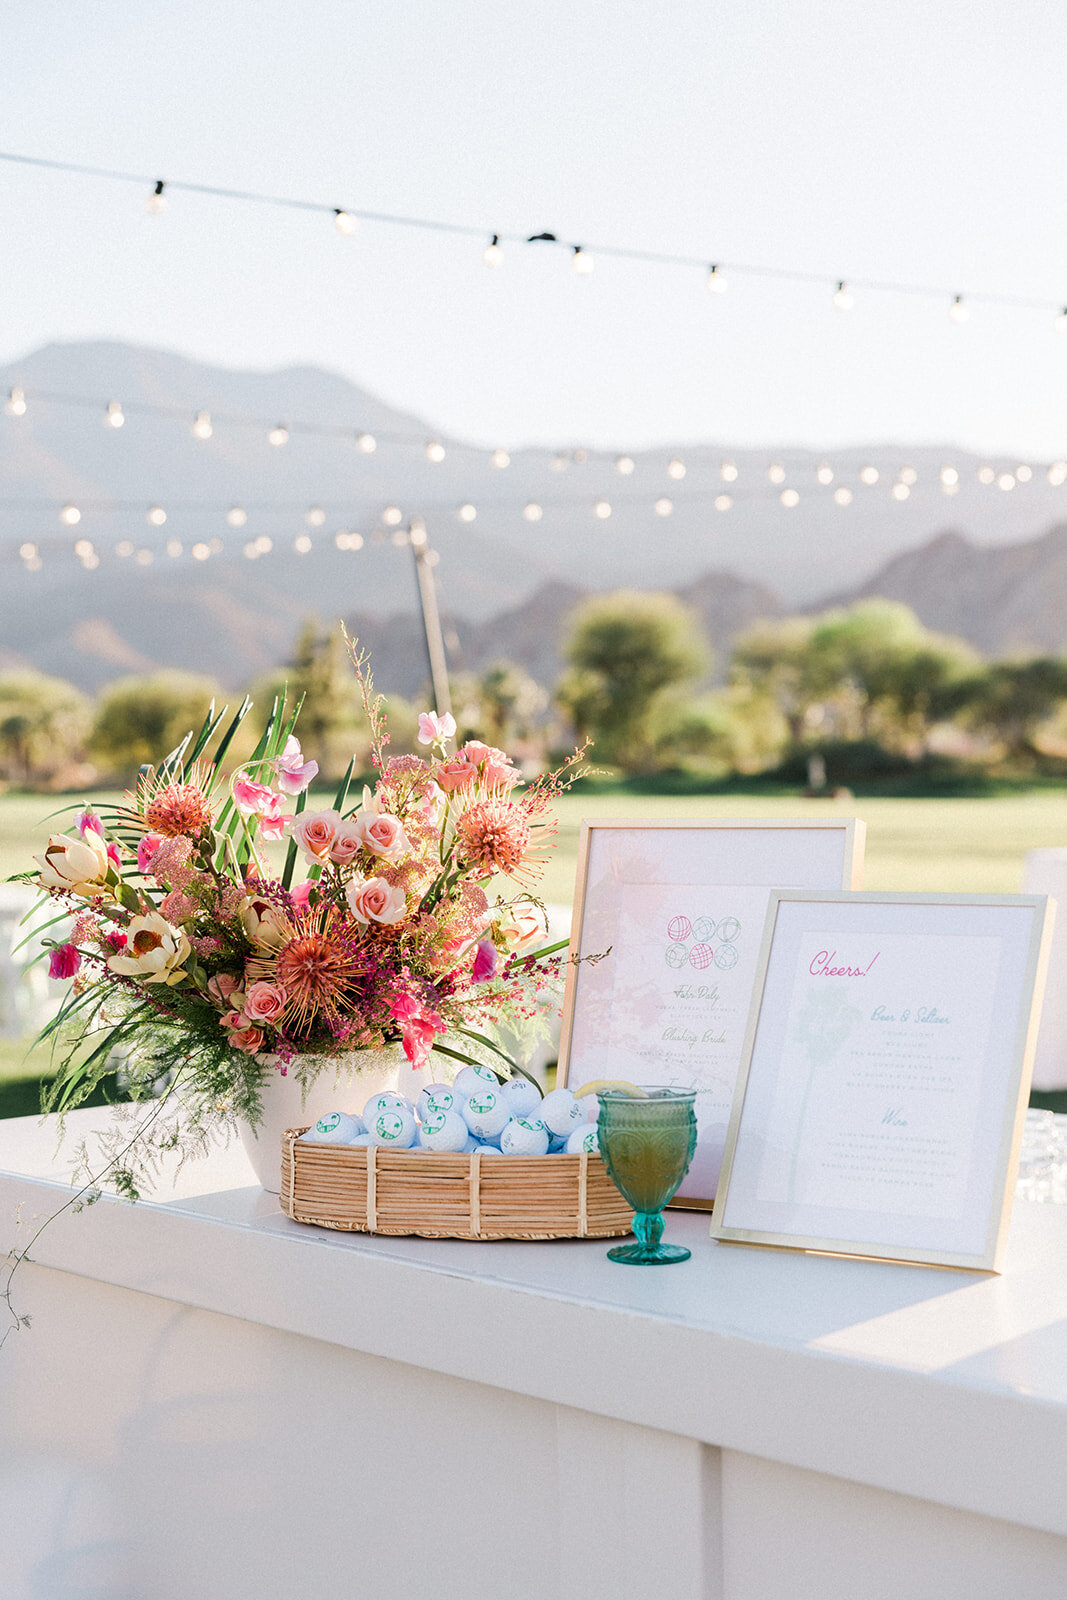 PGA West Welcome Wedding Party-Valorie Darling Photography-VKD29463_websize